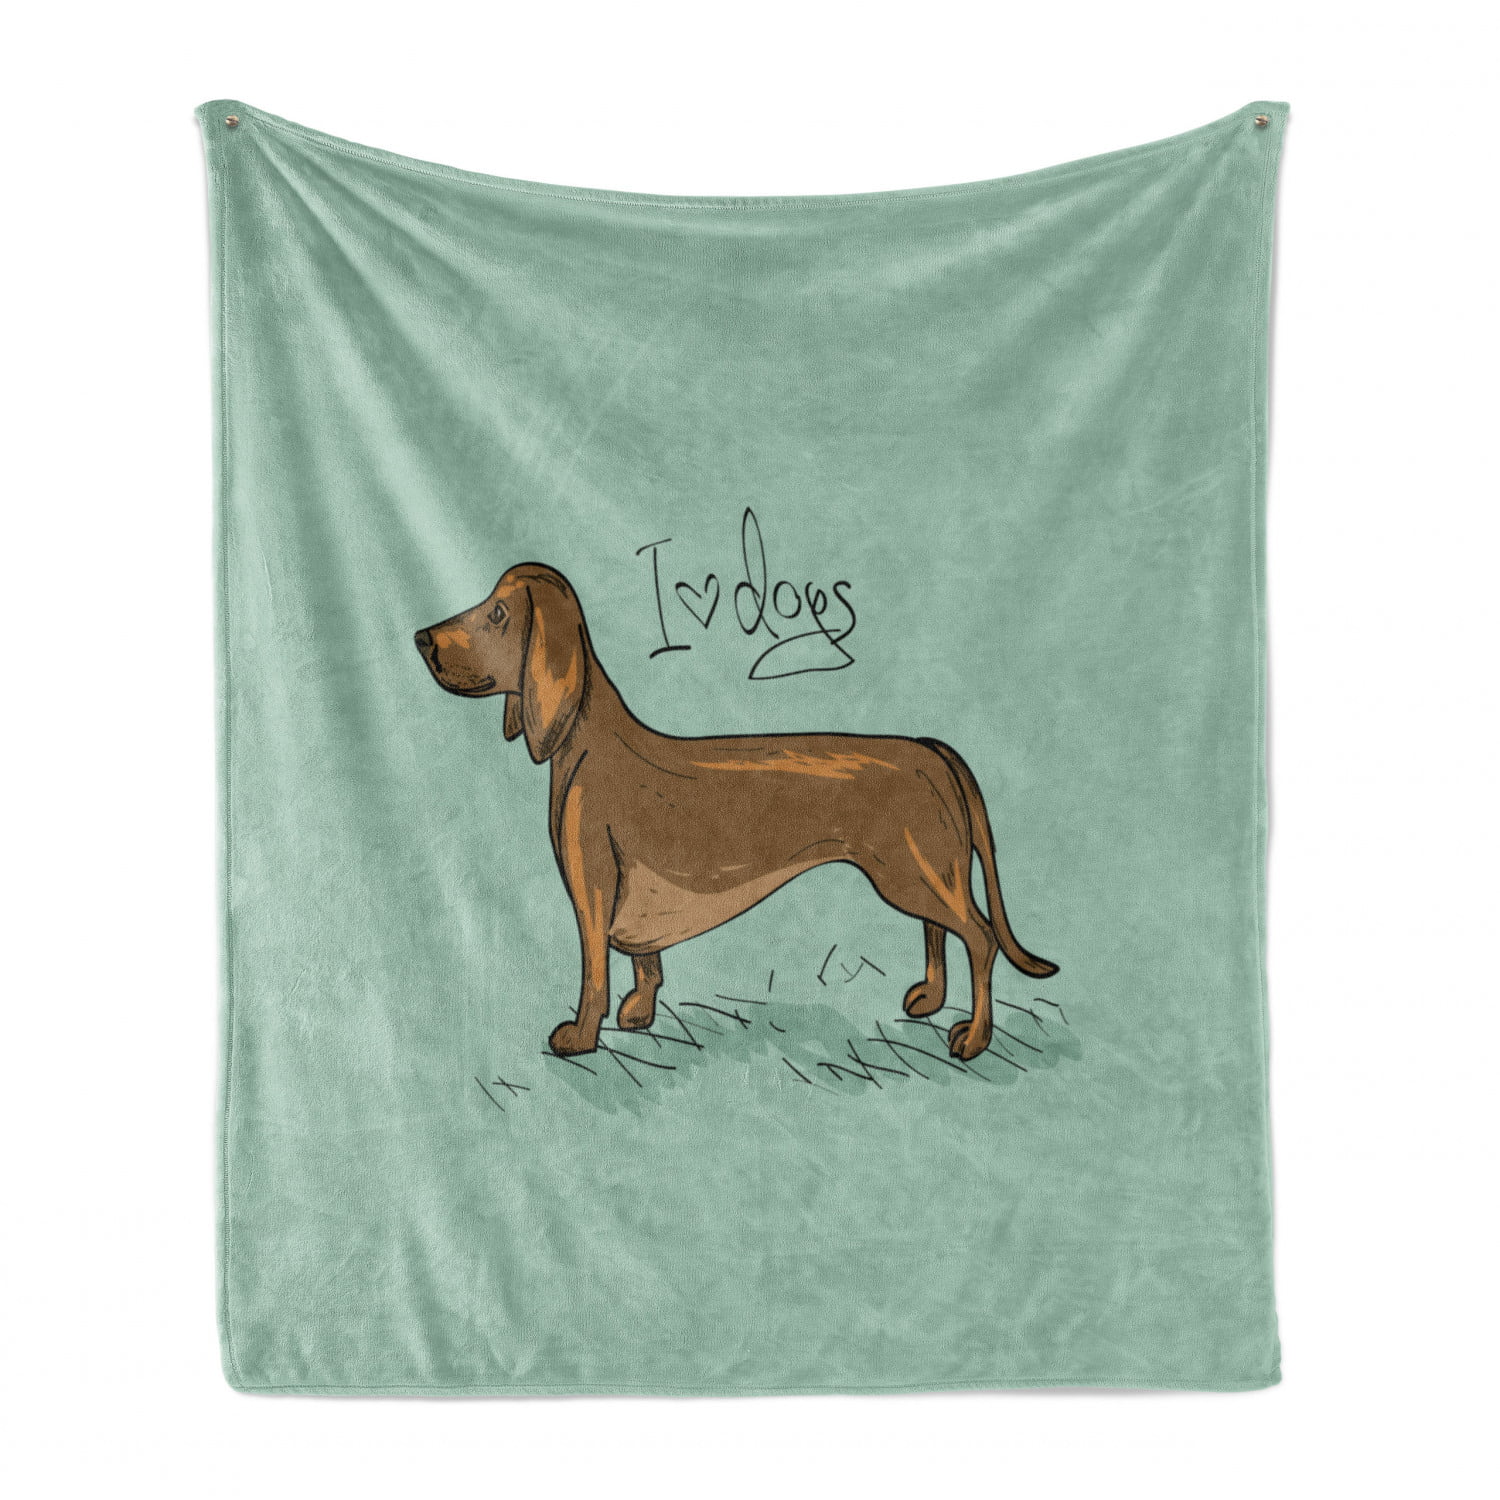 Dachshund Soft Flannel Fleece Blanket, Dachshund Puppy on an Abstract  Turquoise Background Pure Breed Animal, Cozy Plush for Indoor and Outdoor  Use, 